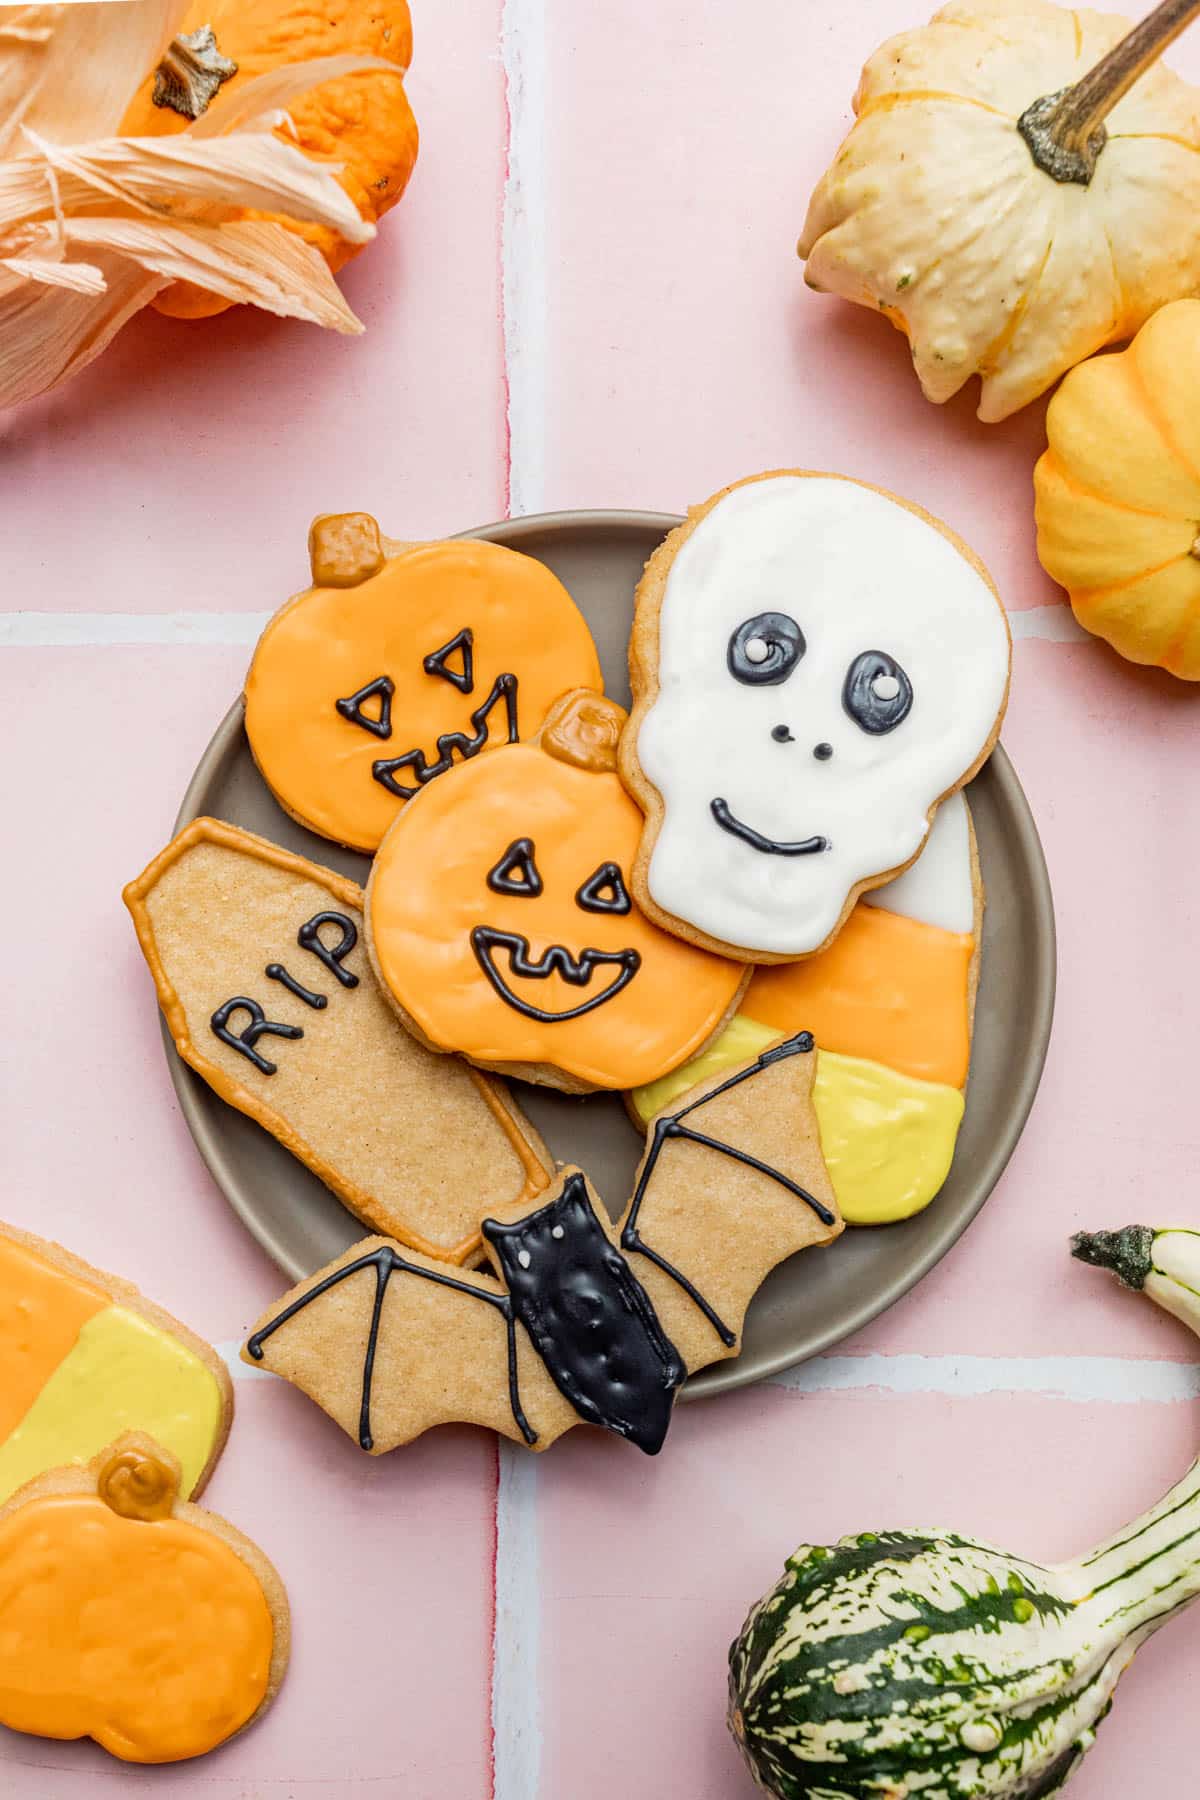 Several halloween-decorated sugar cookies on a plate with small pumpkins around.